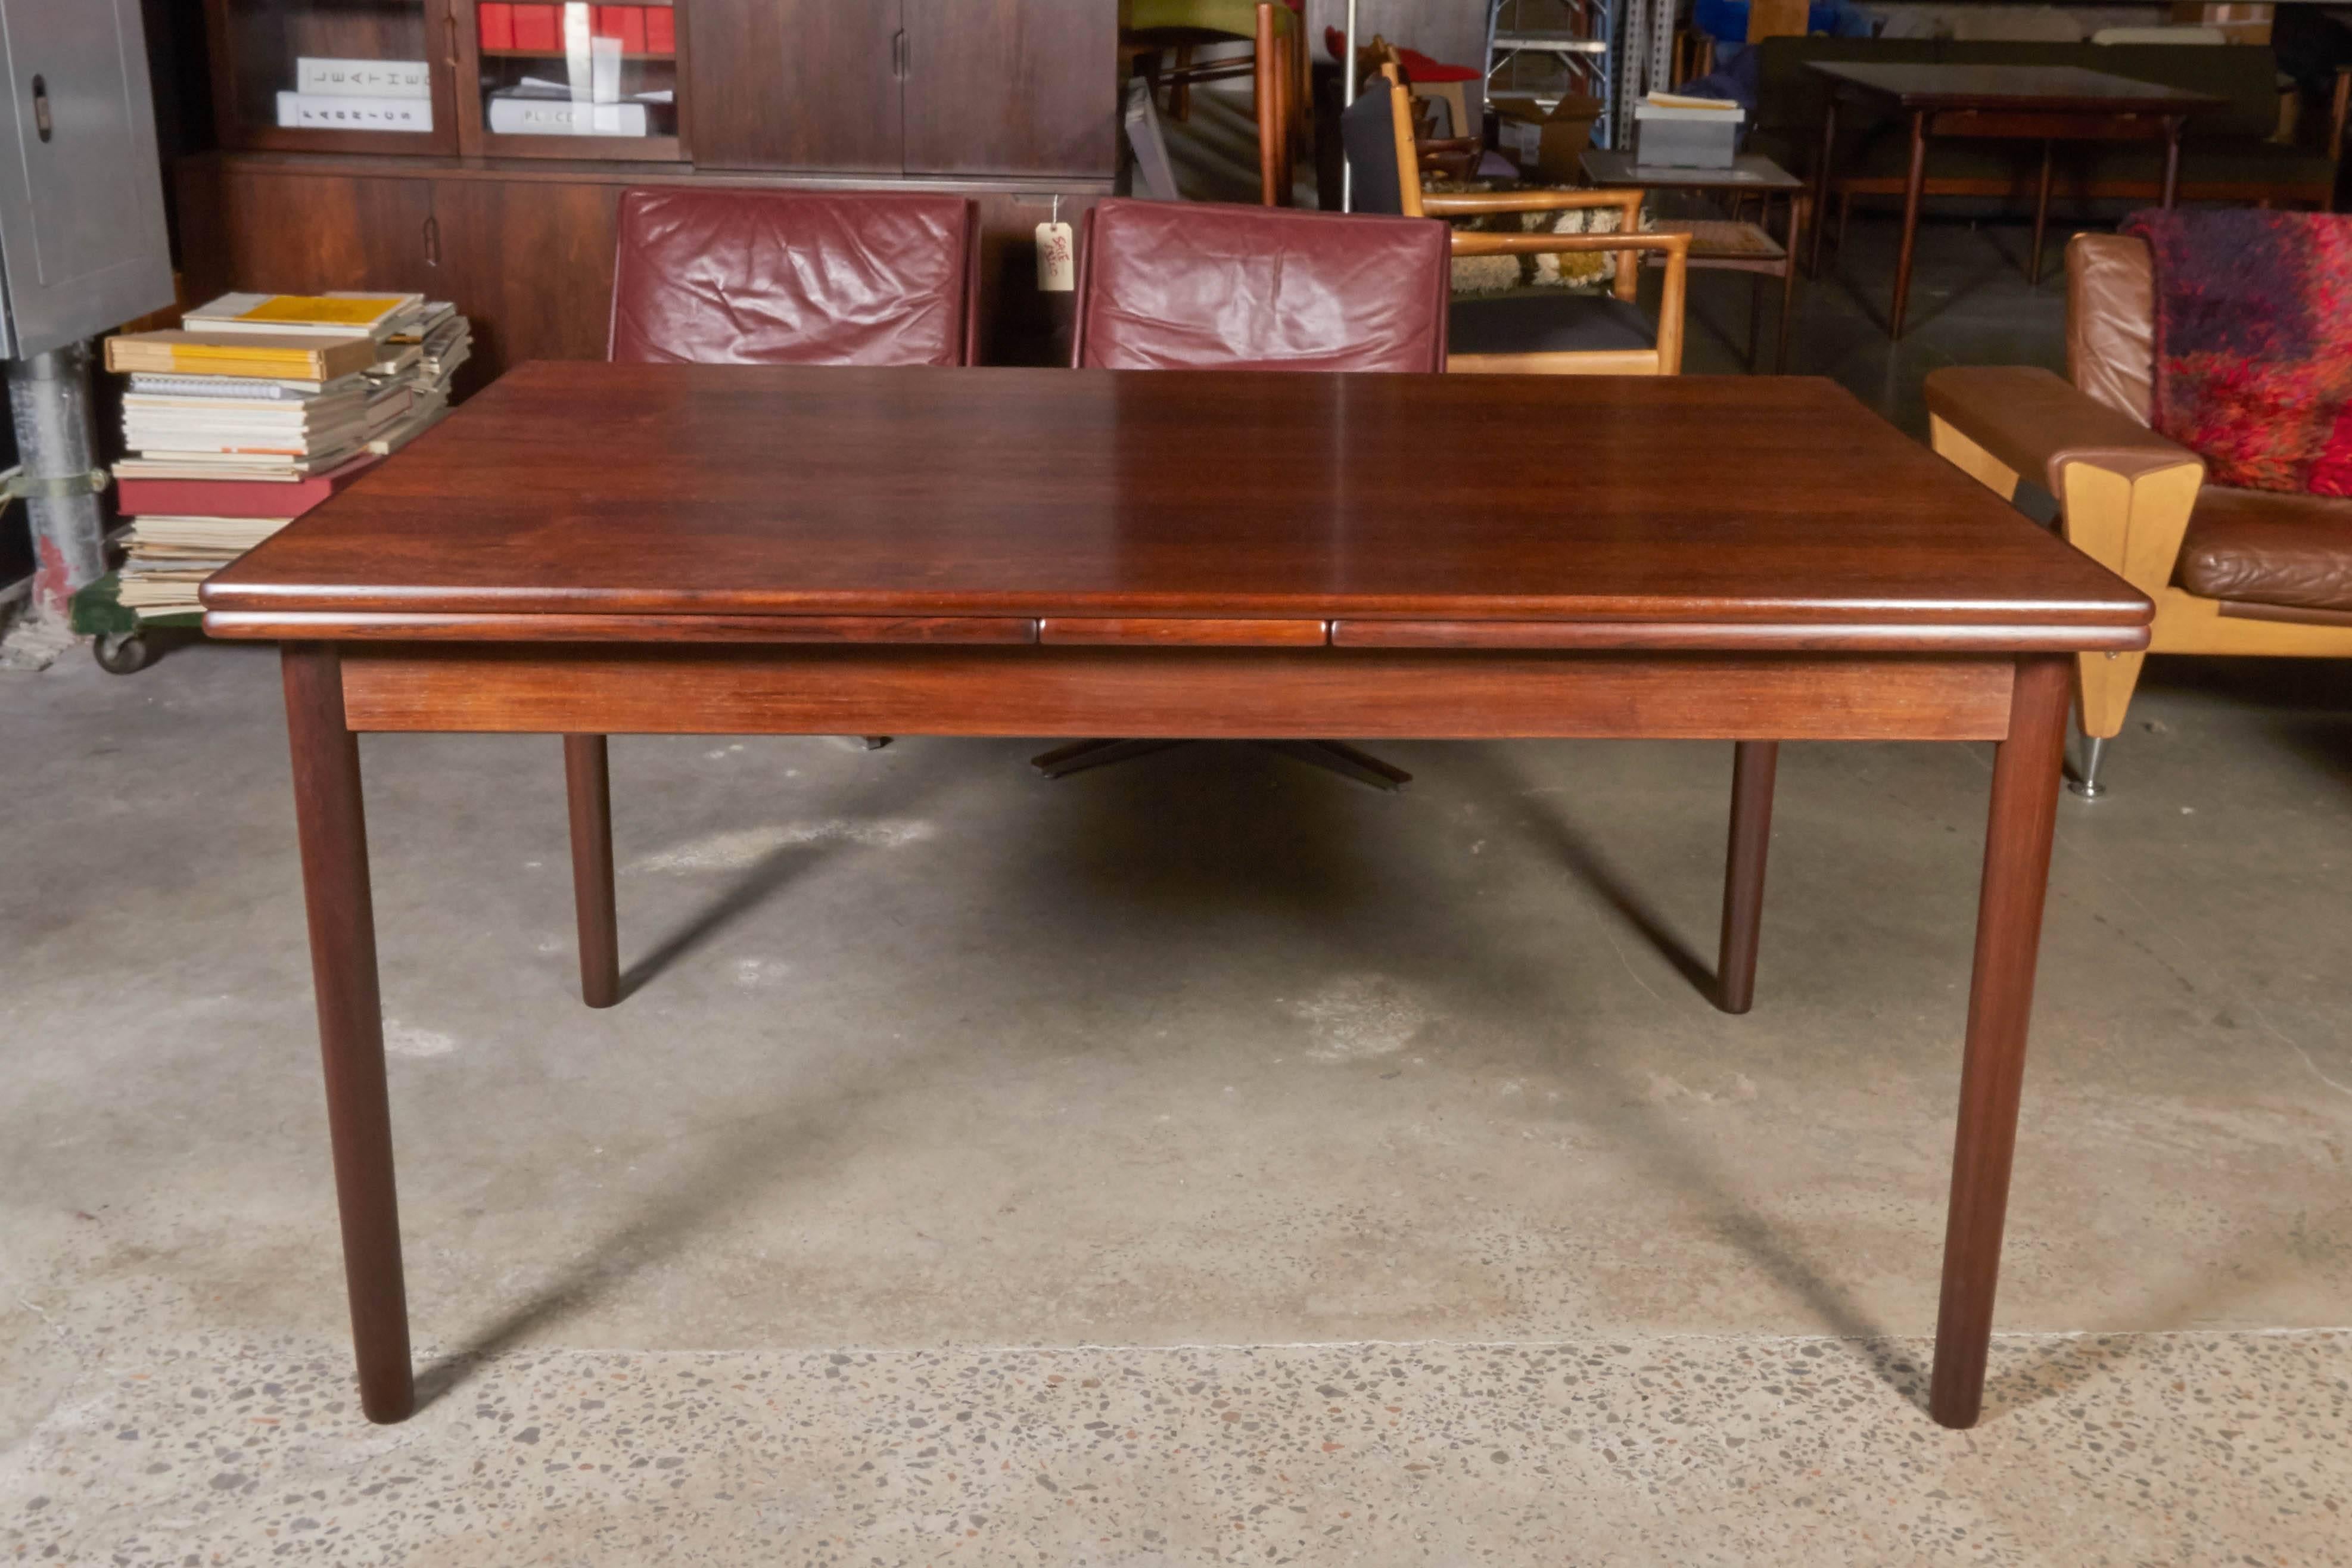 Vintage 1960s Danish Modern Dining Table

This expandable dining room table is excellent condition. The leaves site underneath each side of the table and easily slide out when they are needed. Each leaf is 22.5" wide and when pulled out can